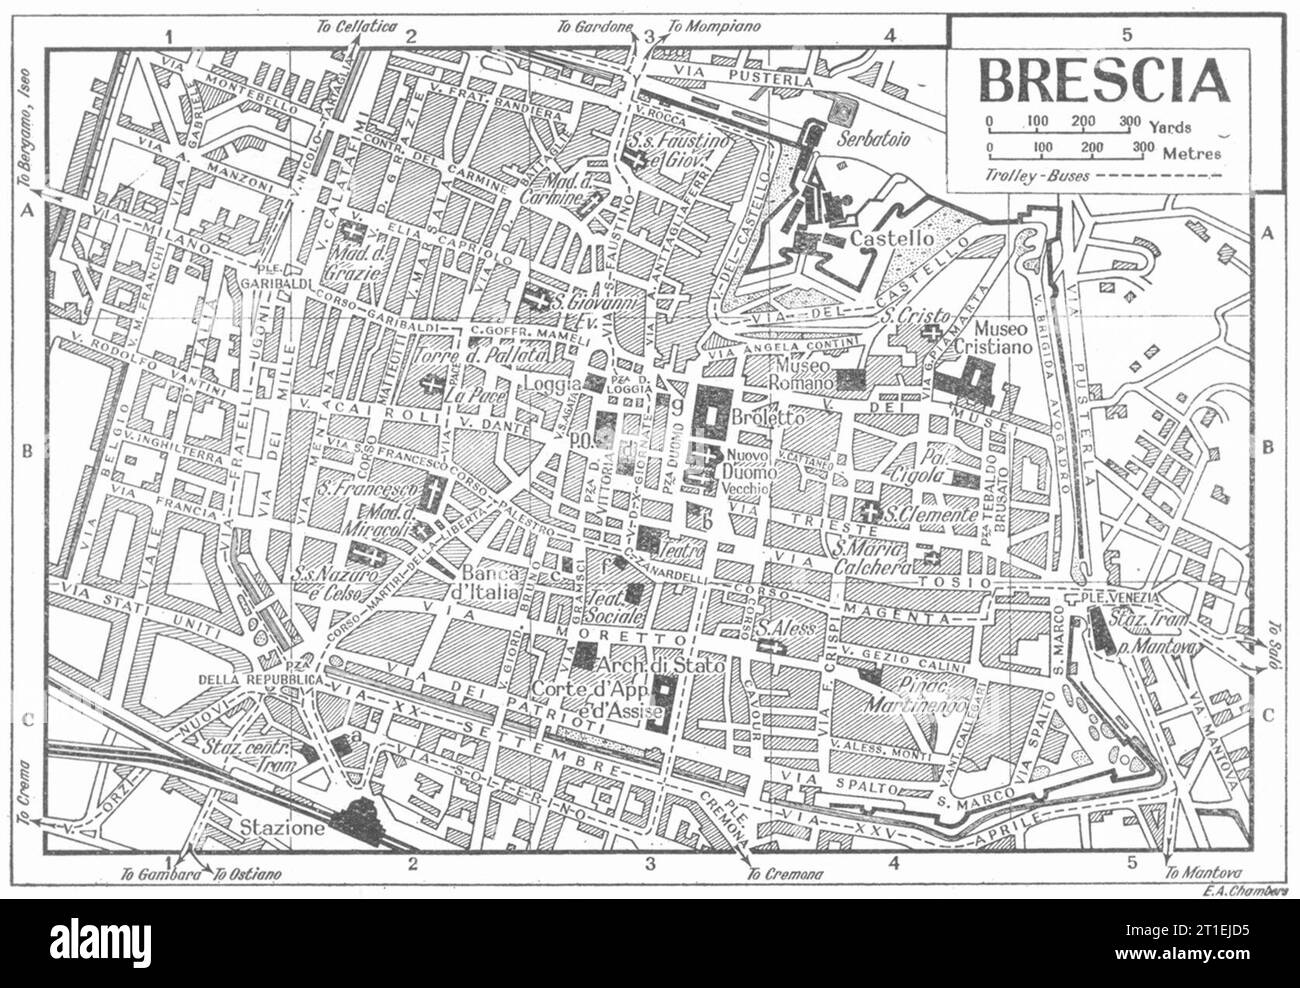 BRESCIA town/city plan. Italy 1953 old vintage map chart Stock Photo